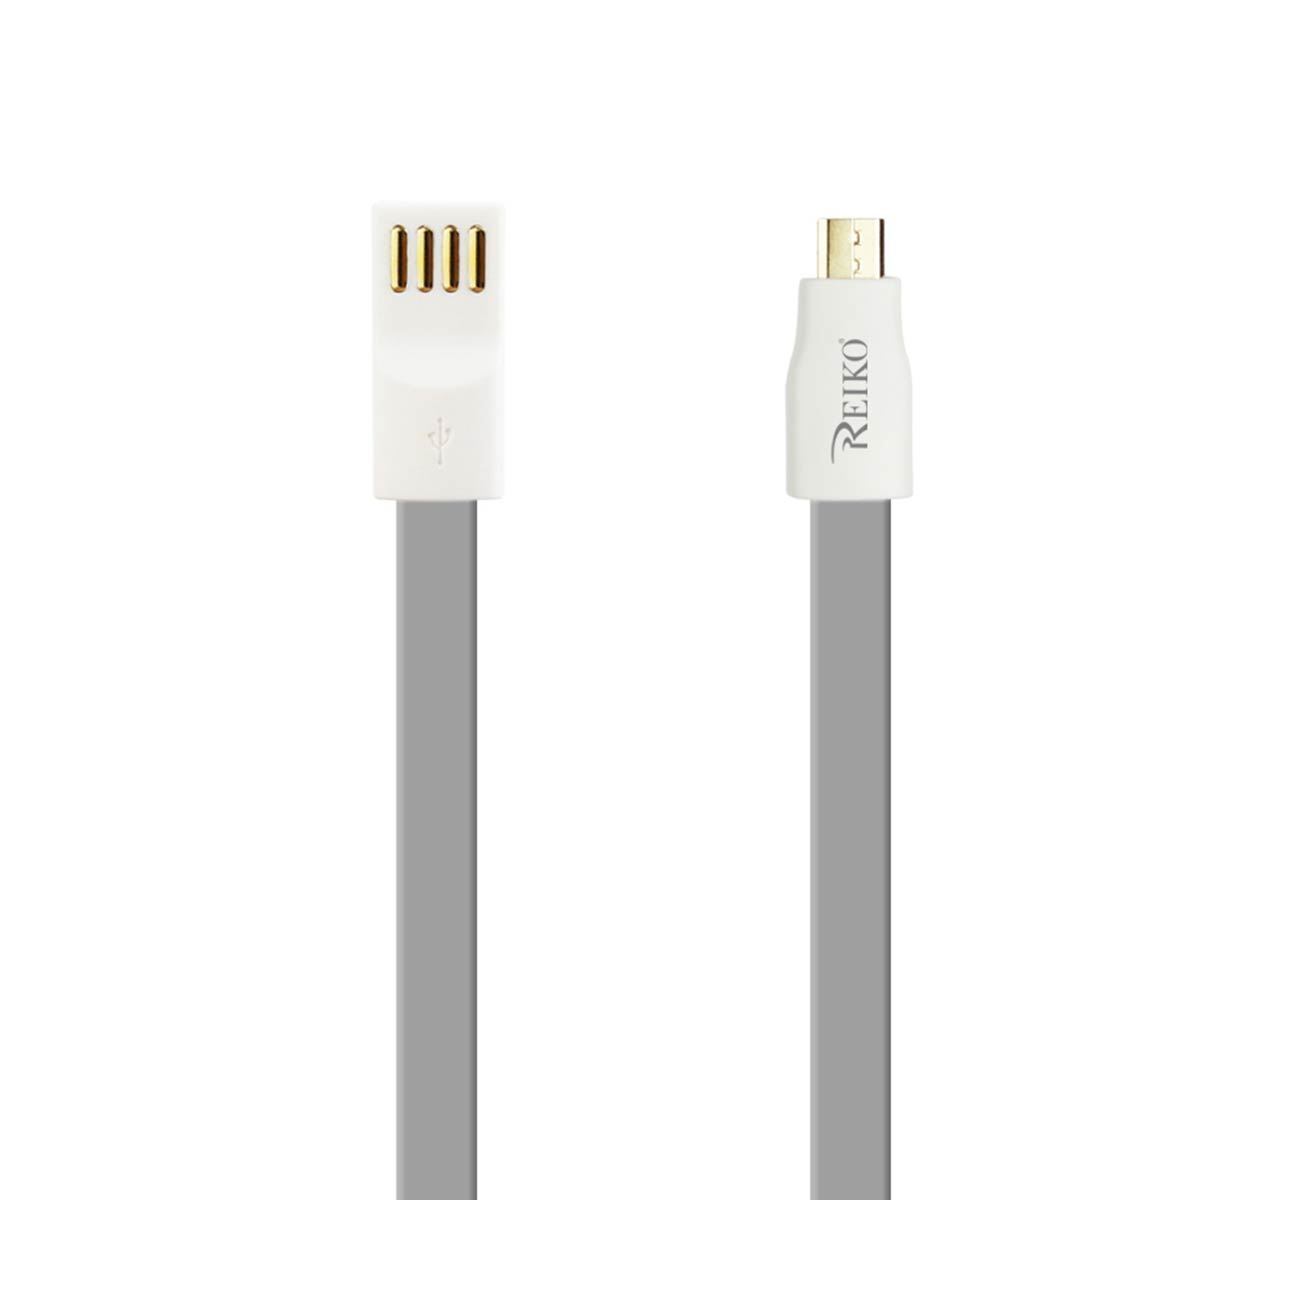 Reiko Flat Micro USB Gold Plated Data Cable 3.9Ft with Cable Tie in Gray | MaxSt